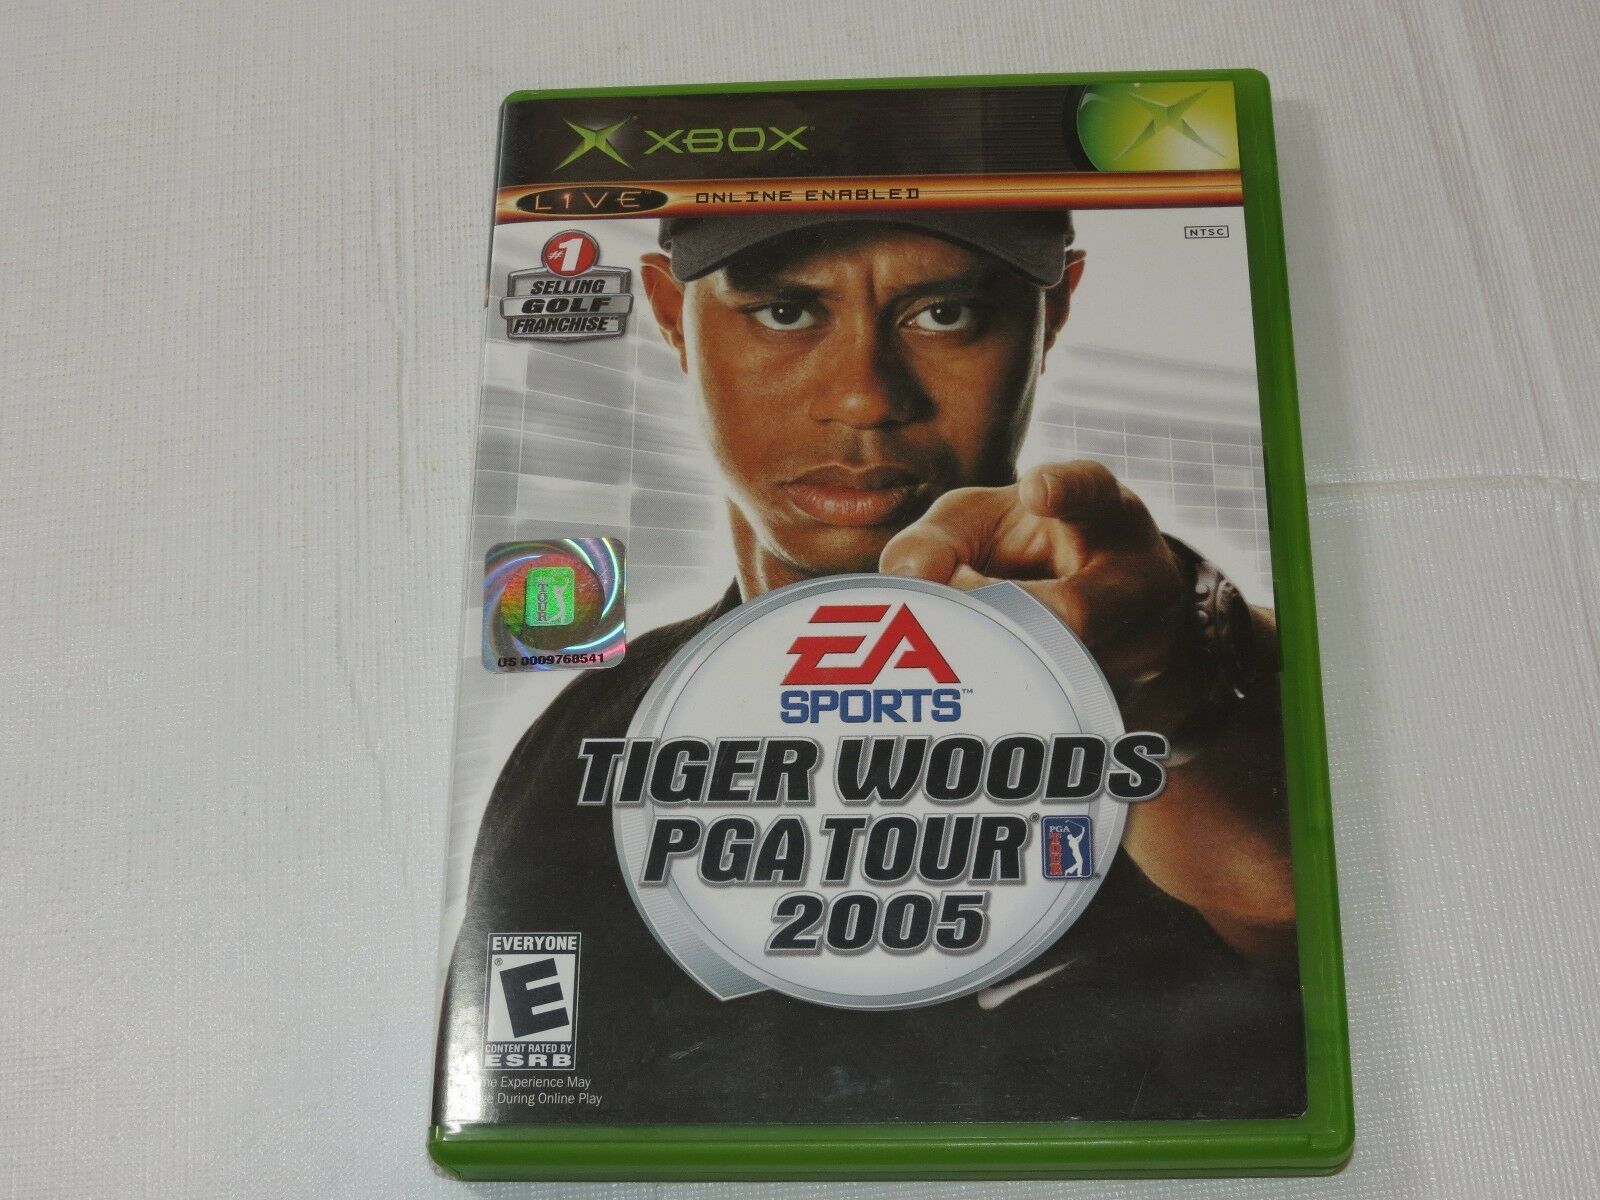 Primary image for EA Sports Tiger Woods PGA Tour 2005 XBOX E-Everyone Online Enabled Pre-Owned